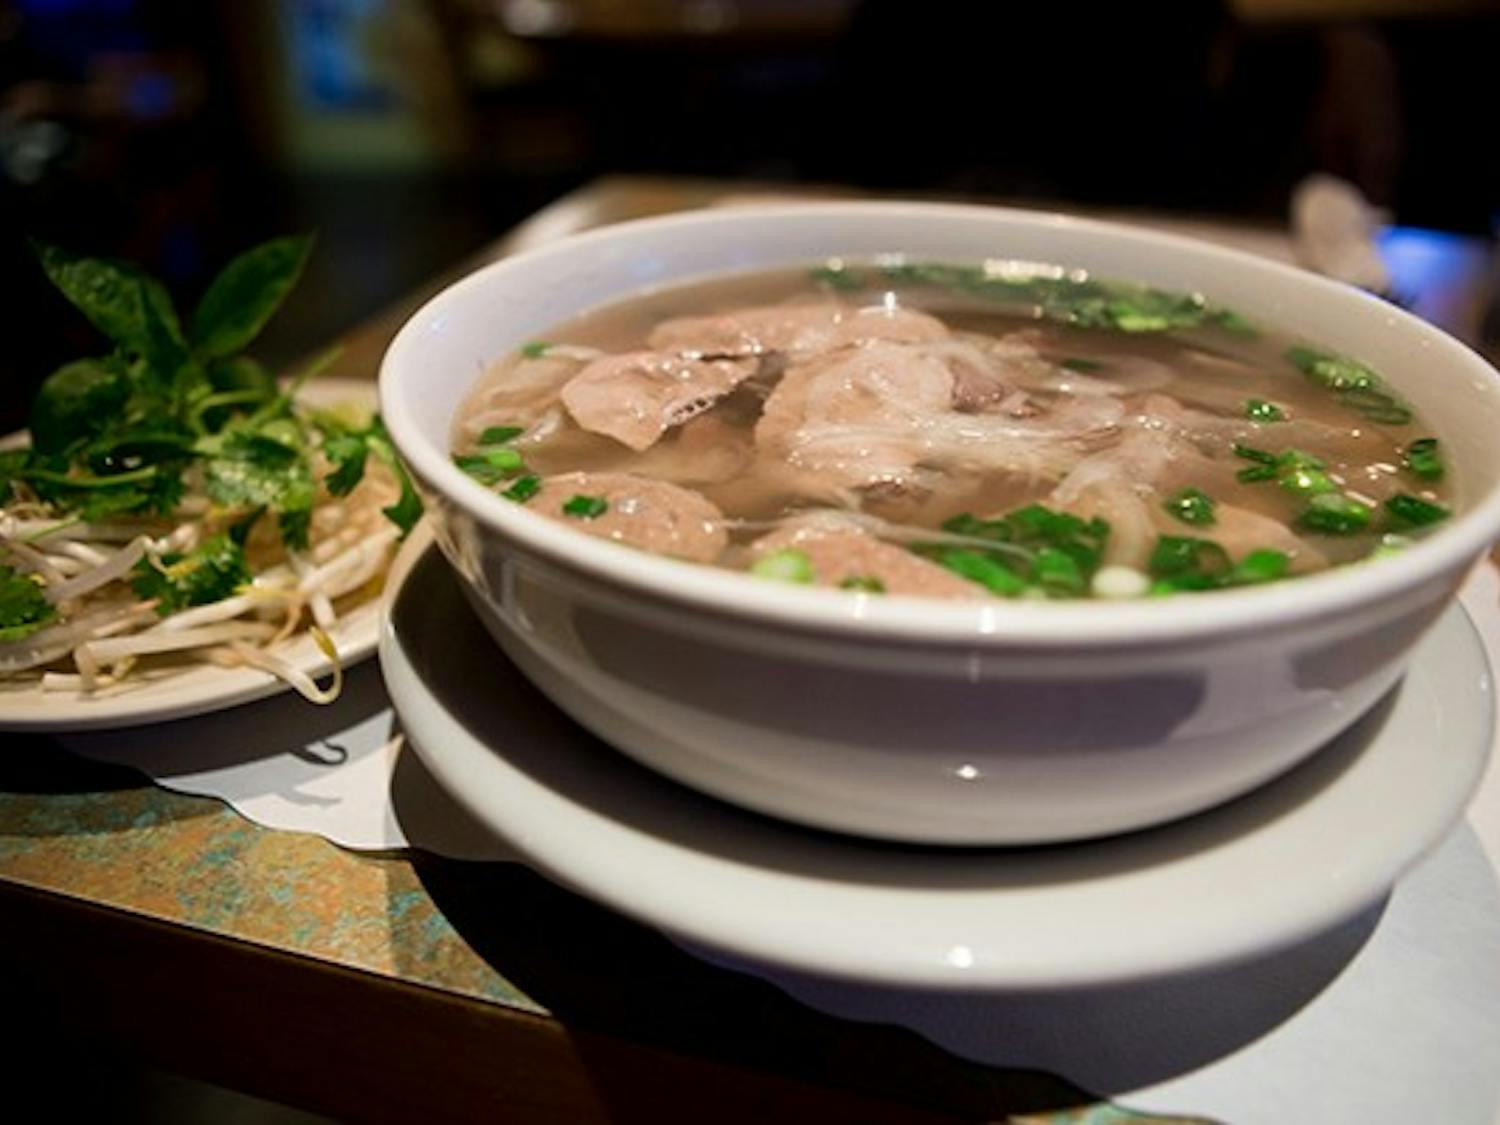 Special Combo Pho Cao Dac Biet (Pho with lean rare steak, well-done flank, marble brisket, tendon, tripe, and meat balls) can be found at Pho Cao Restaurant & Bar on Gilbert Drive and Scottsdale Road. (Photo by Ryan Liu)